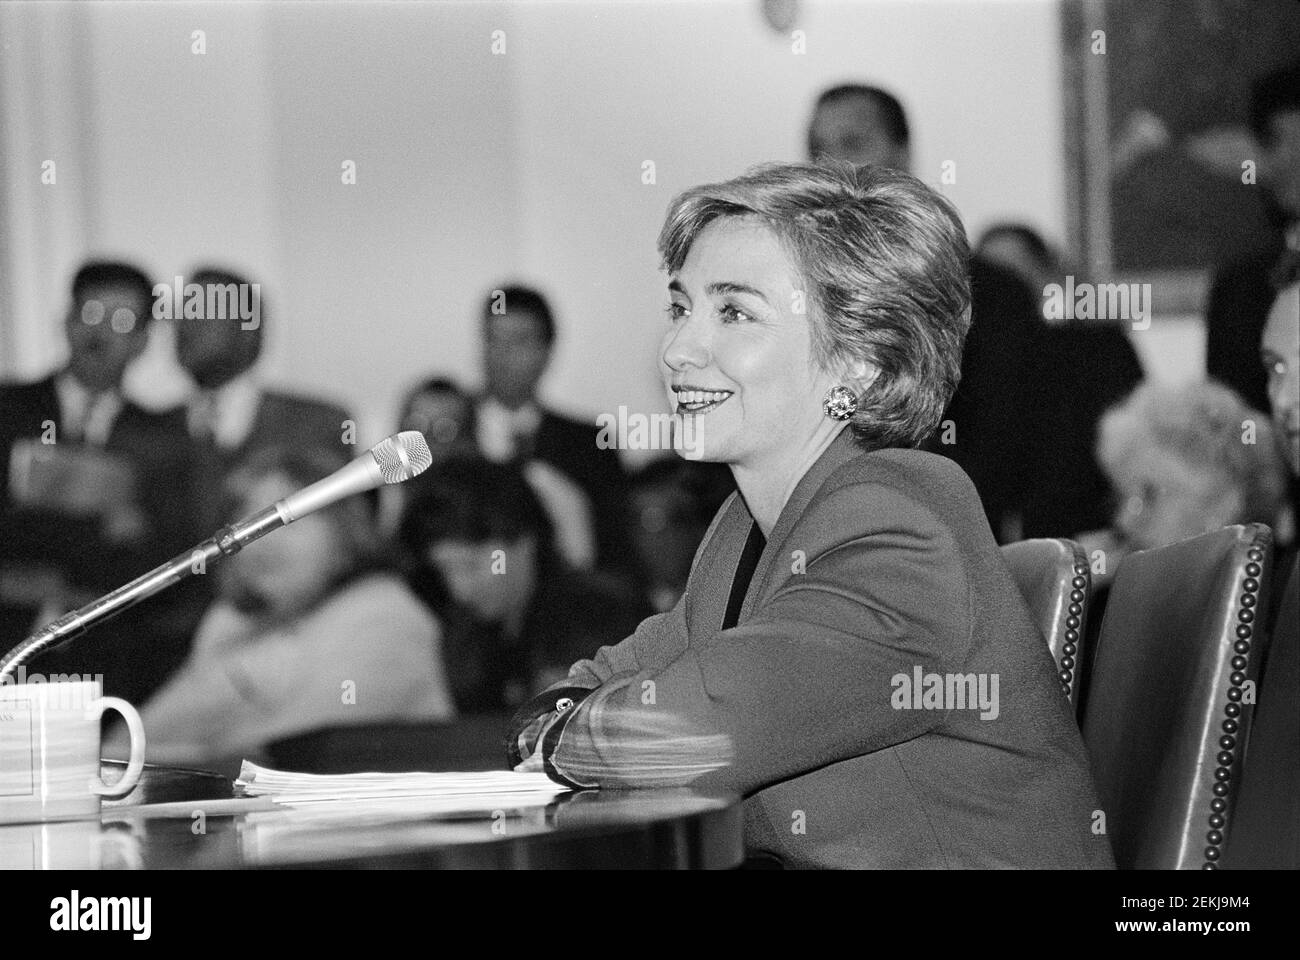 U.S. First Lady Hillary Clinton during her Presentation at Congressional Hearing on Healthcare Reform, Washington, D.C., USA, Maureen Keating, September 1993 Stock Photo